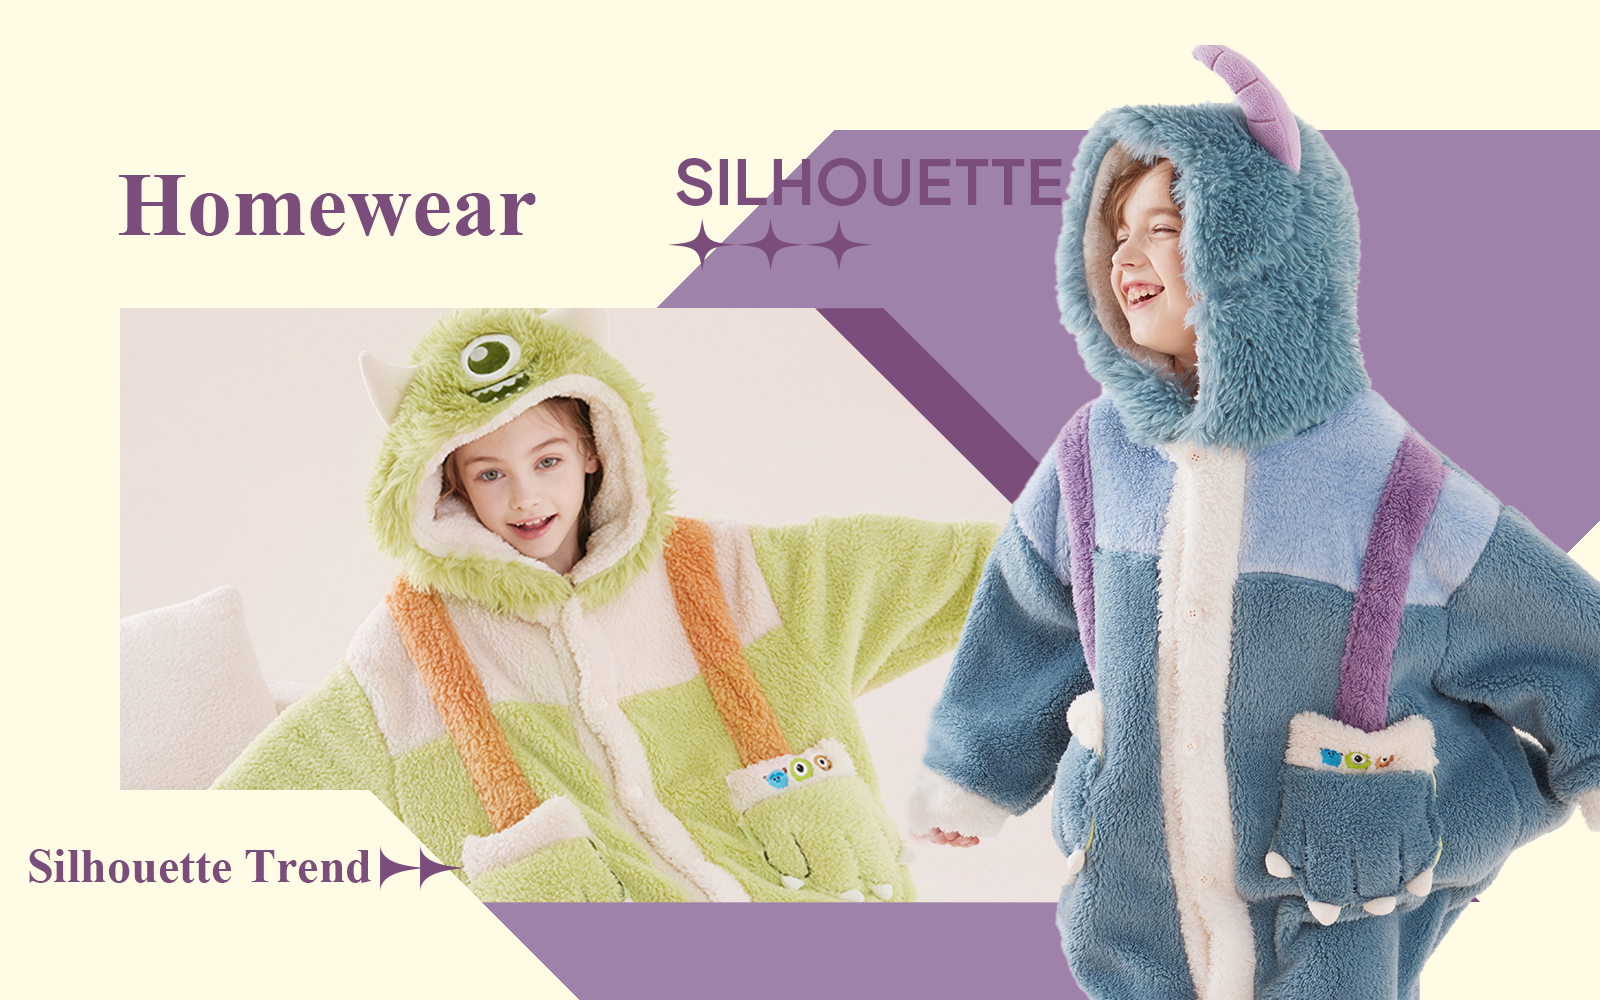 The Silhouette Trend for Kids' Homewear